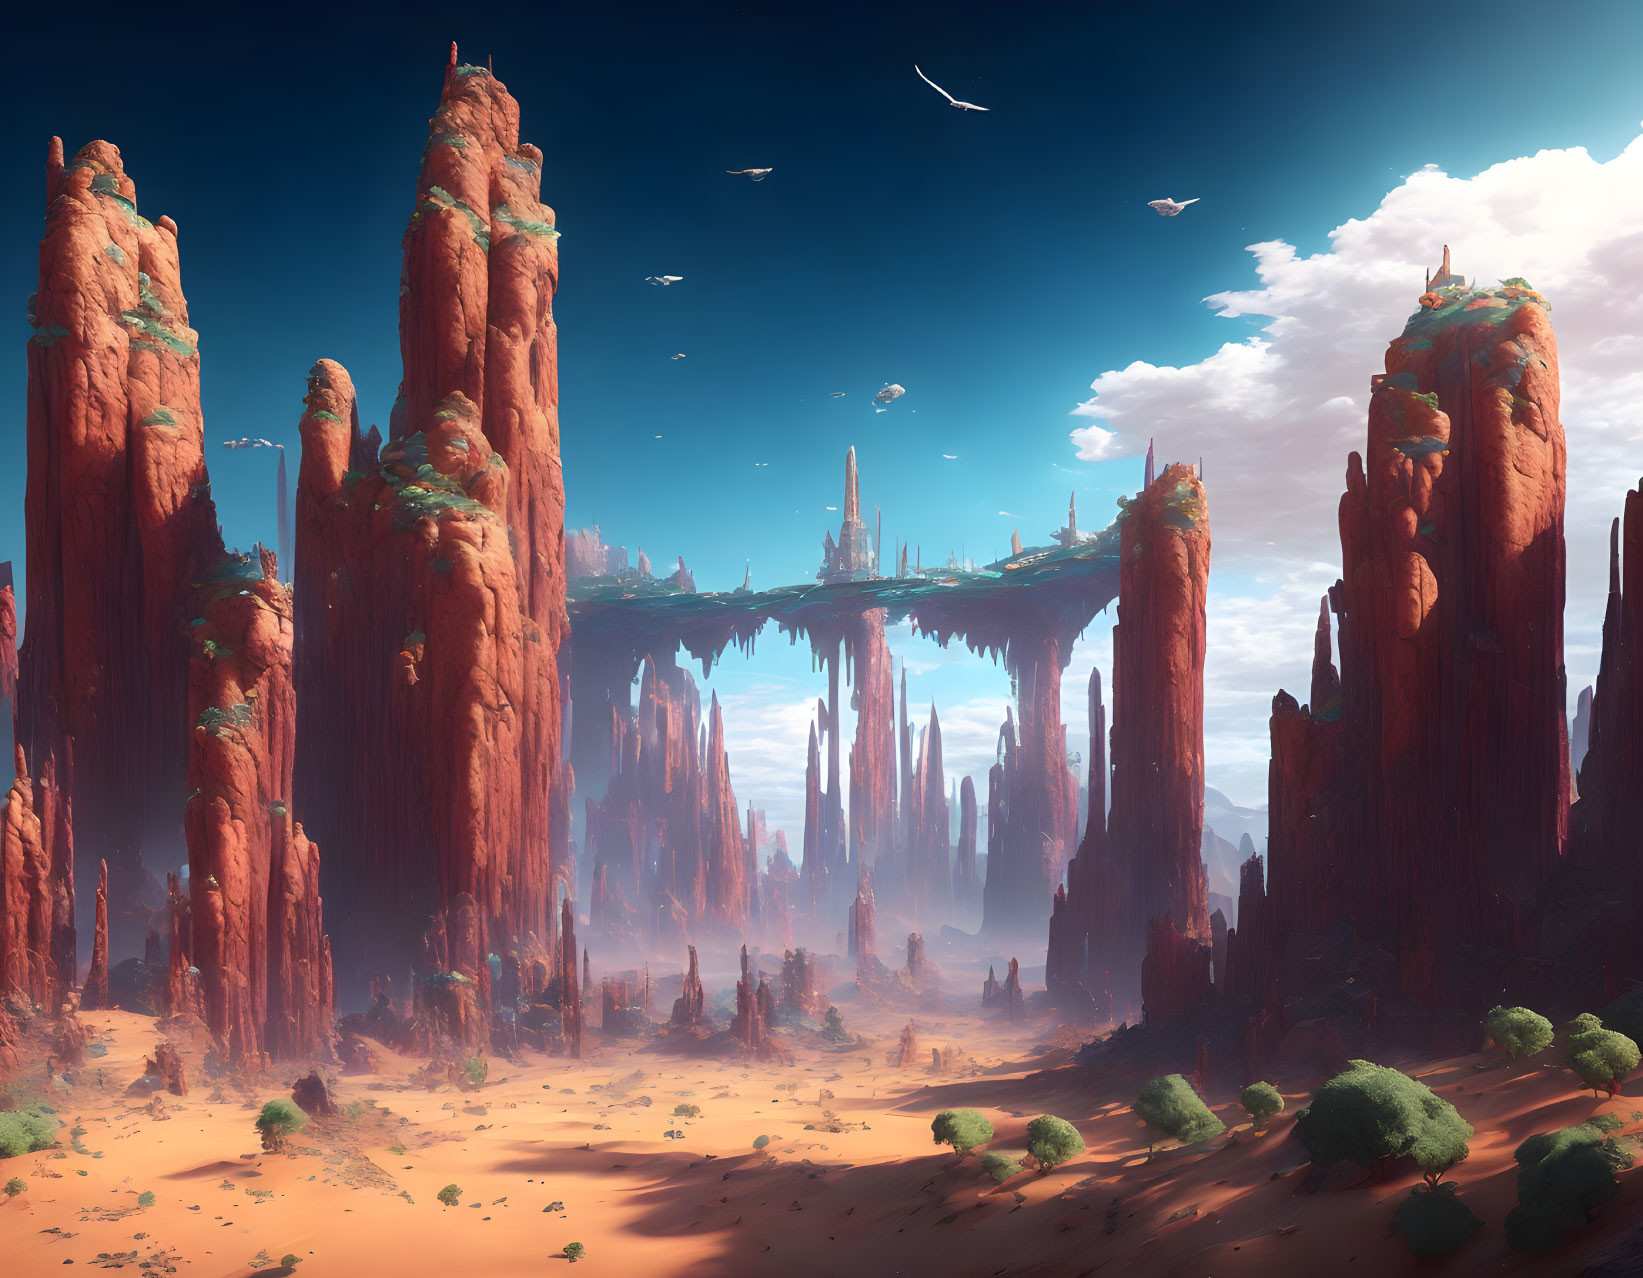 Fantastical red rock formations with city bridges under clear blue sky